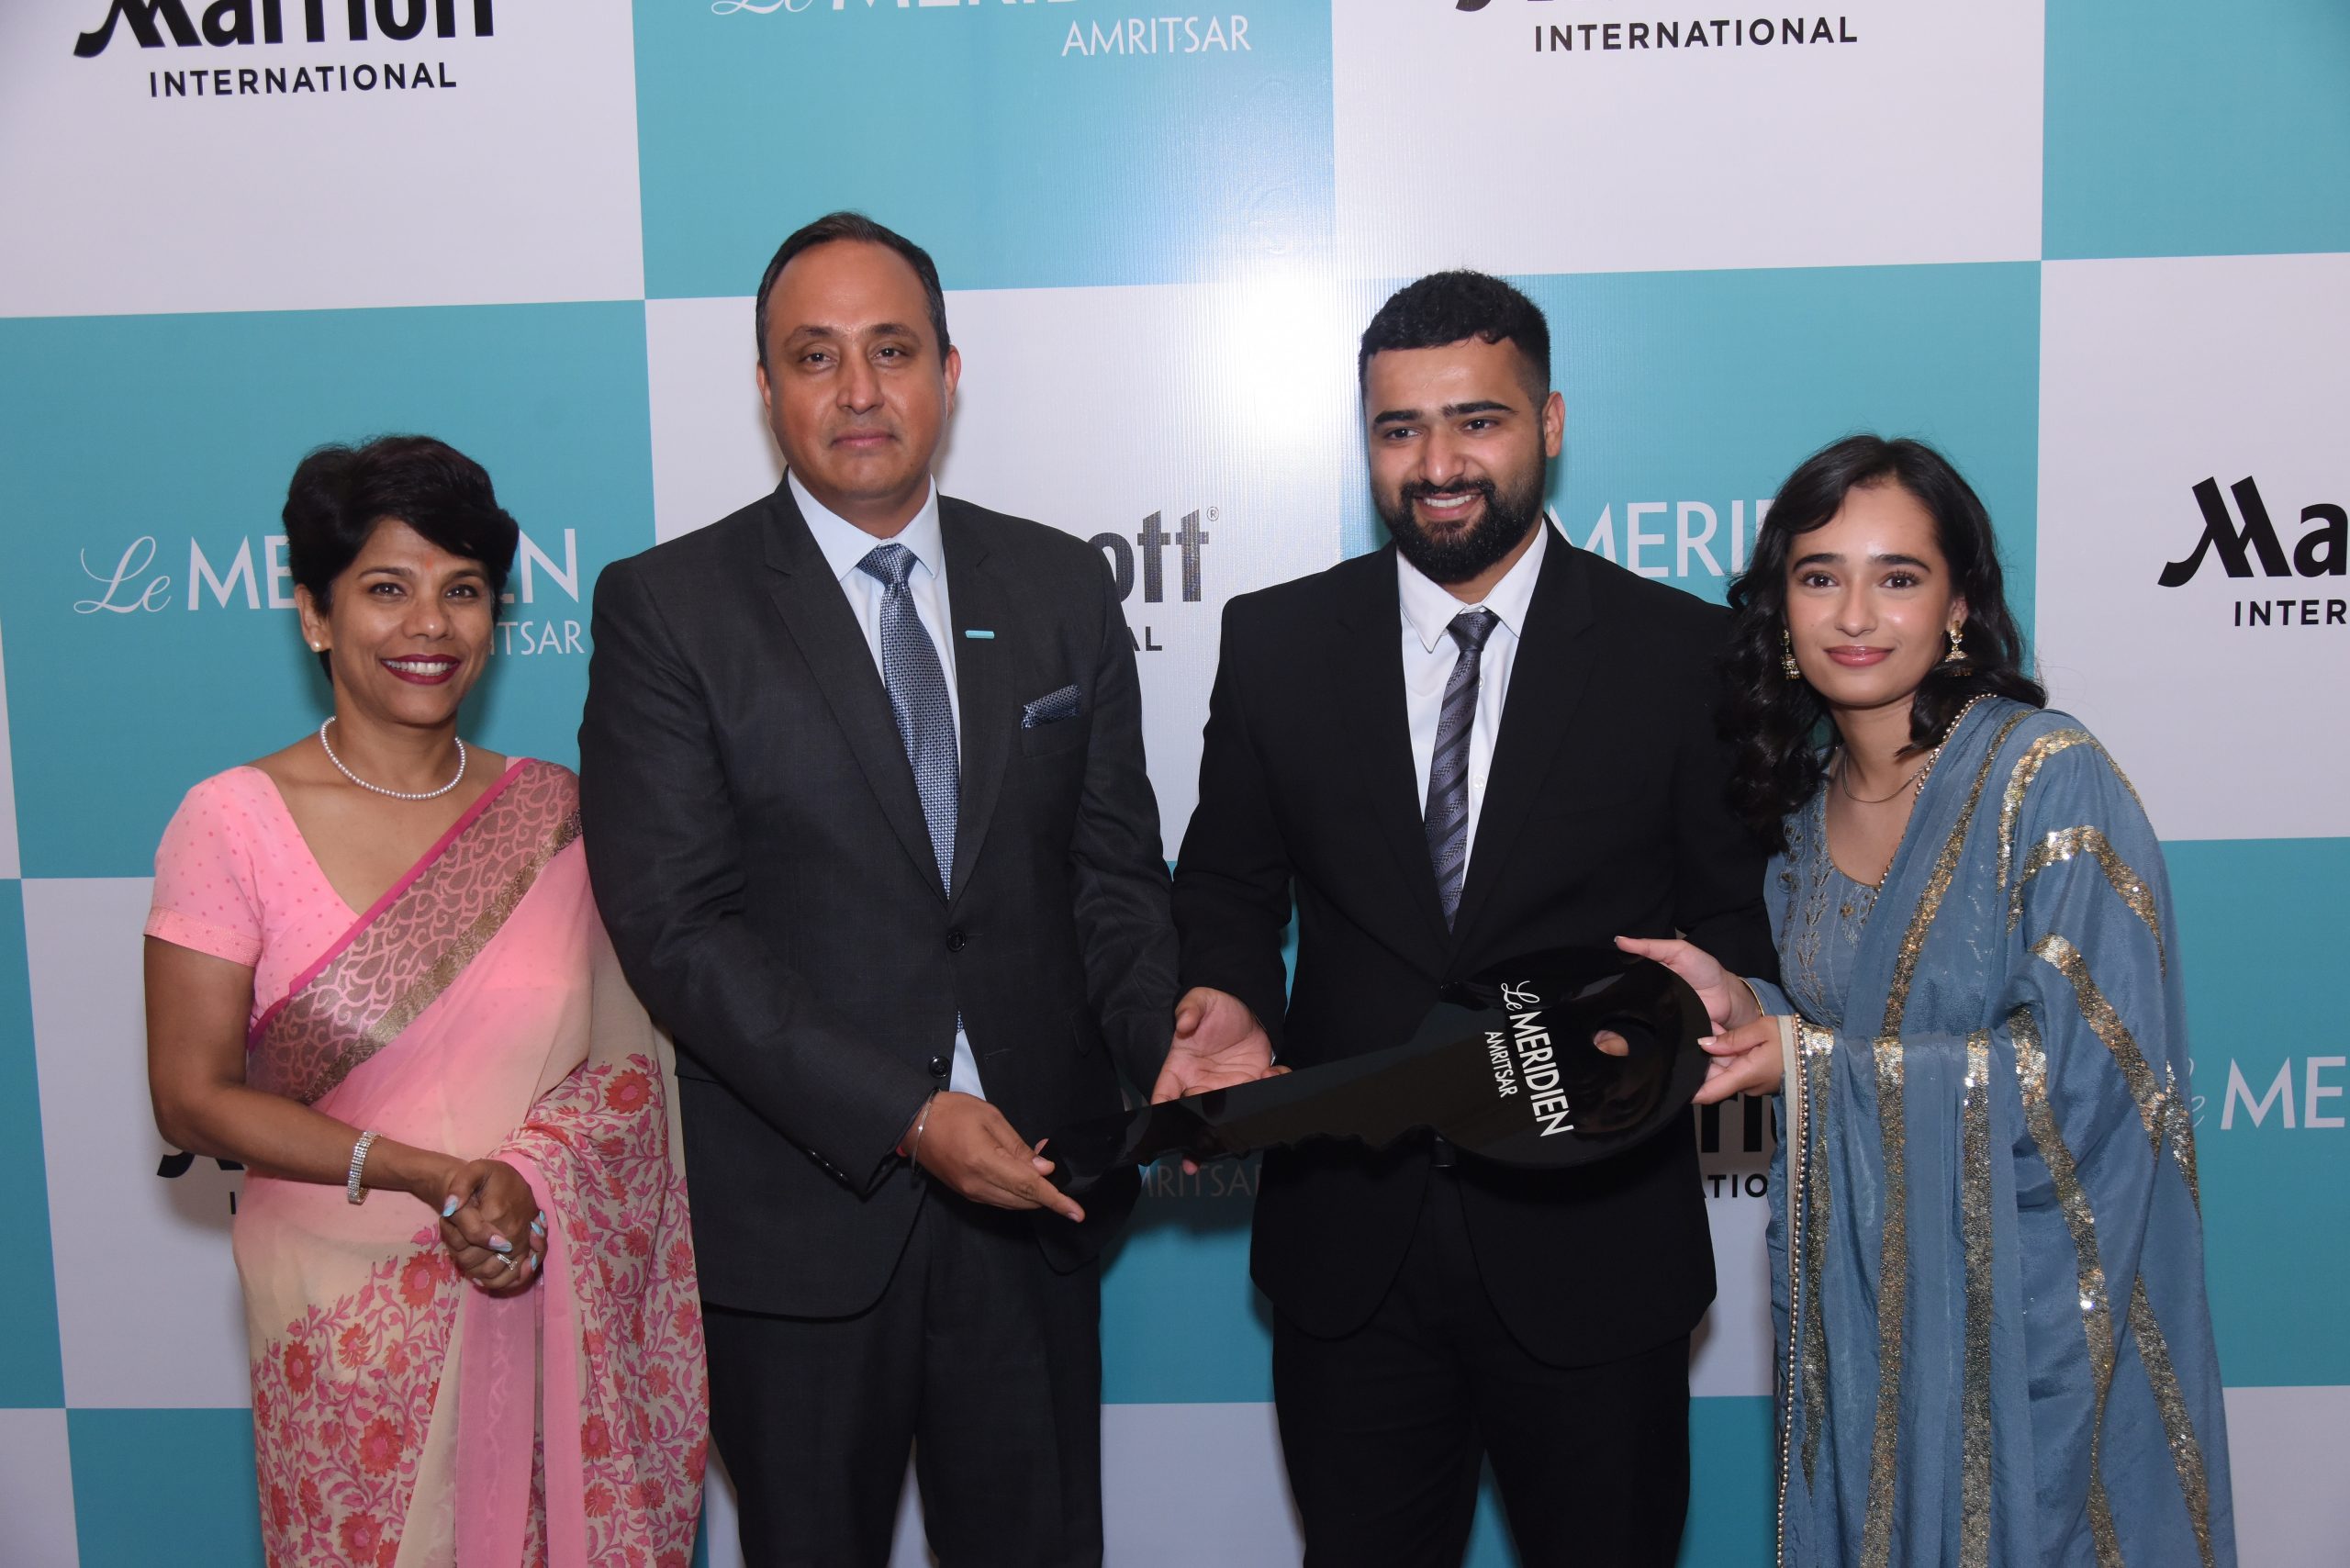 Le Méridien Hotels & Resorts unveils its latest Hotel in Amritsar